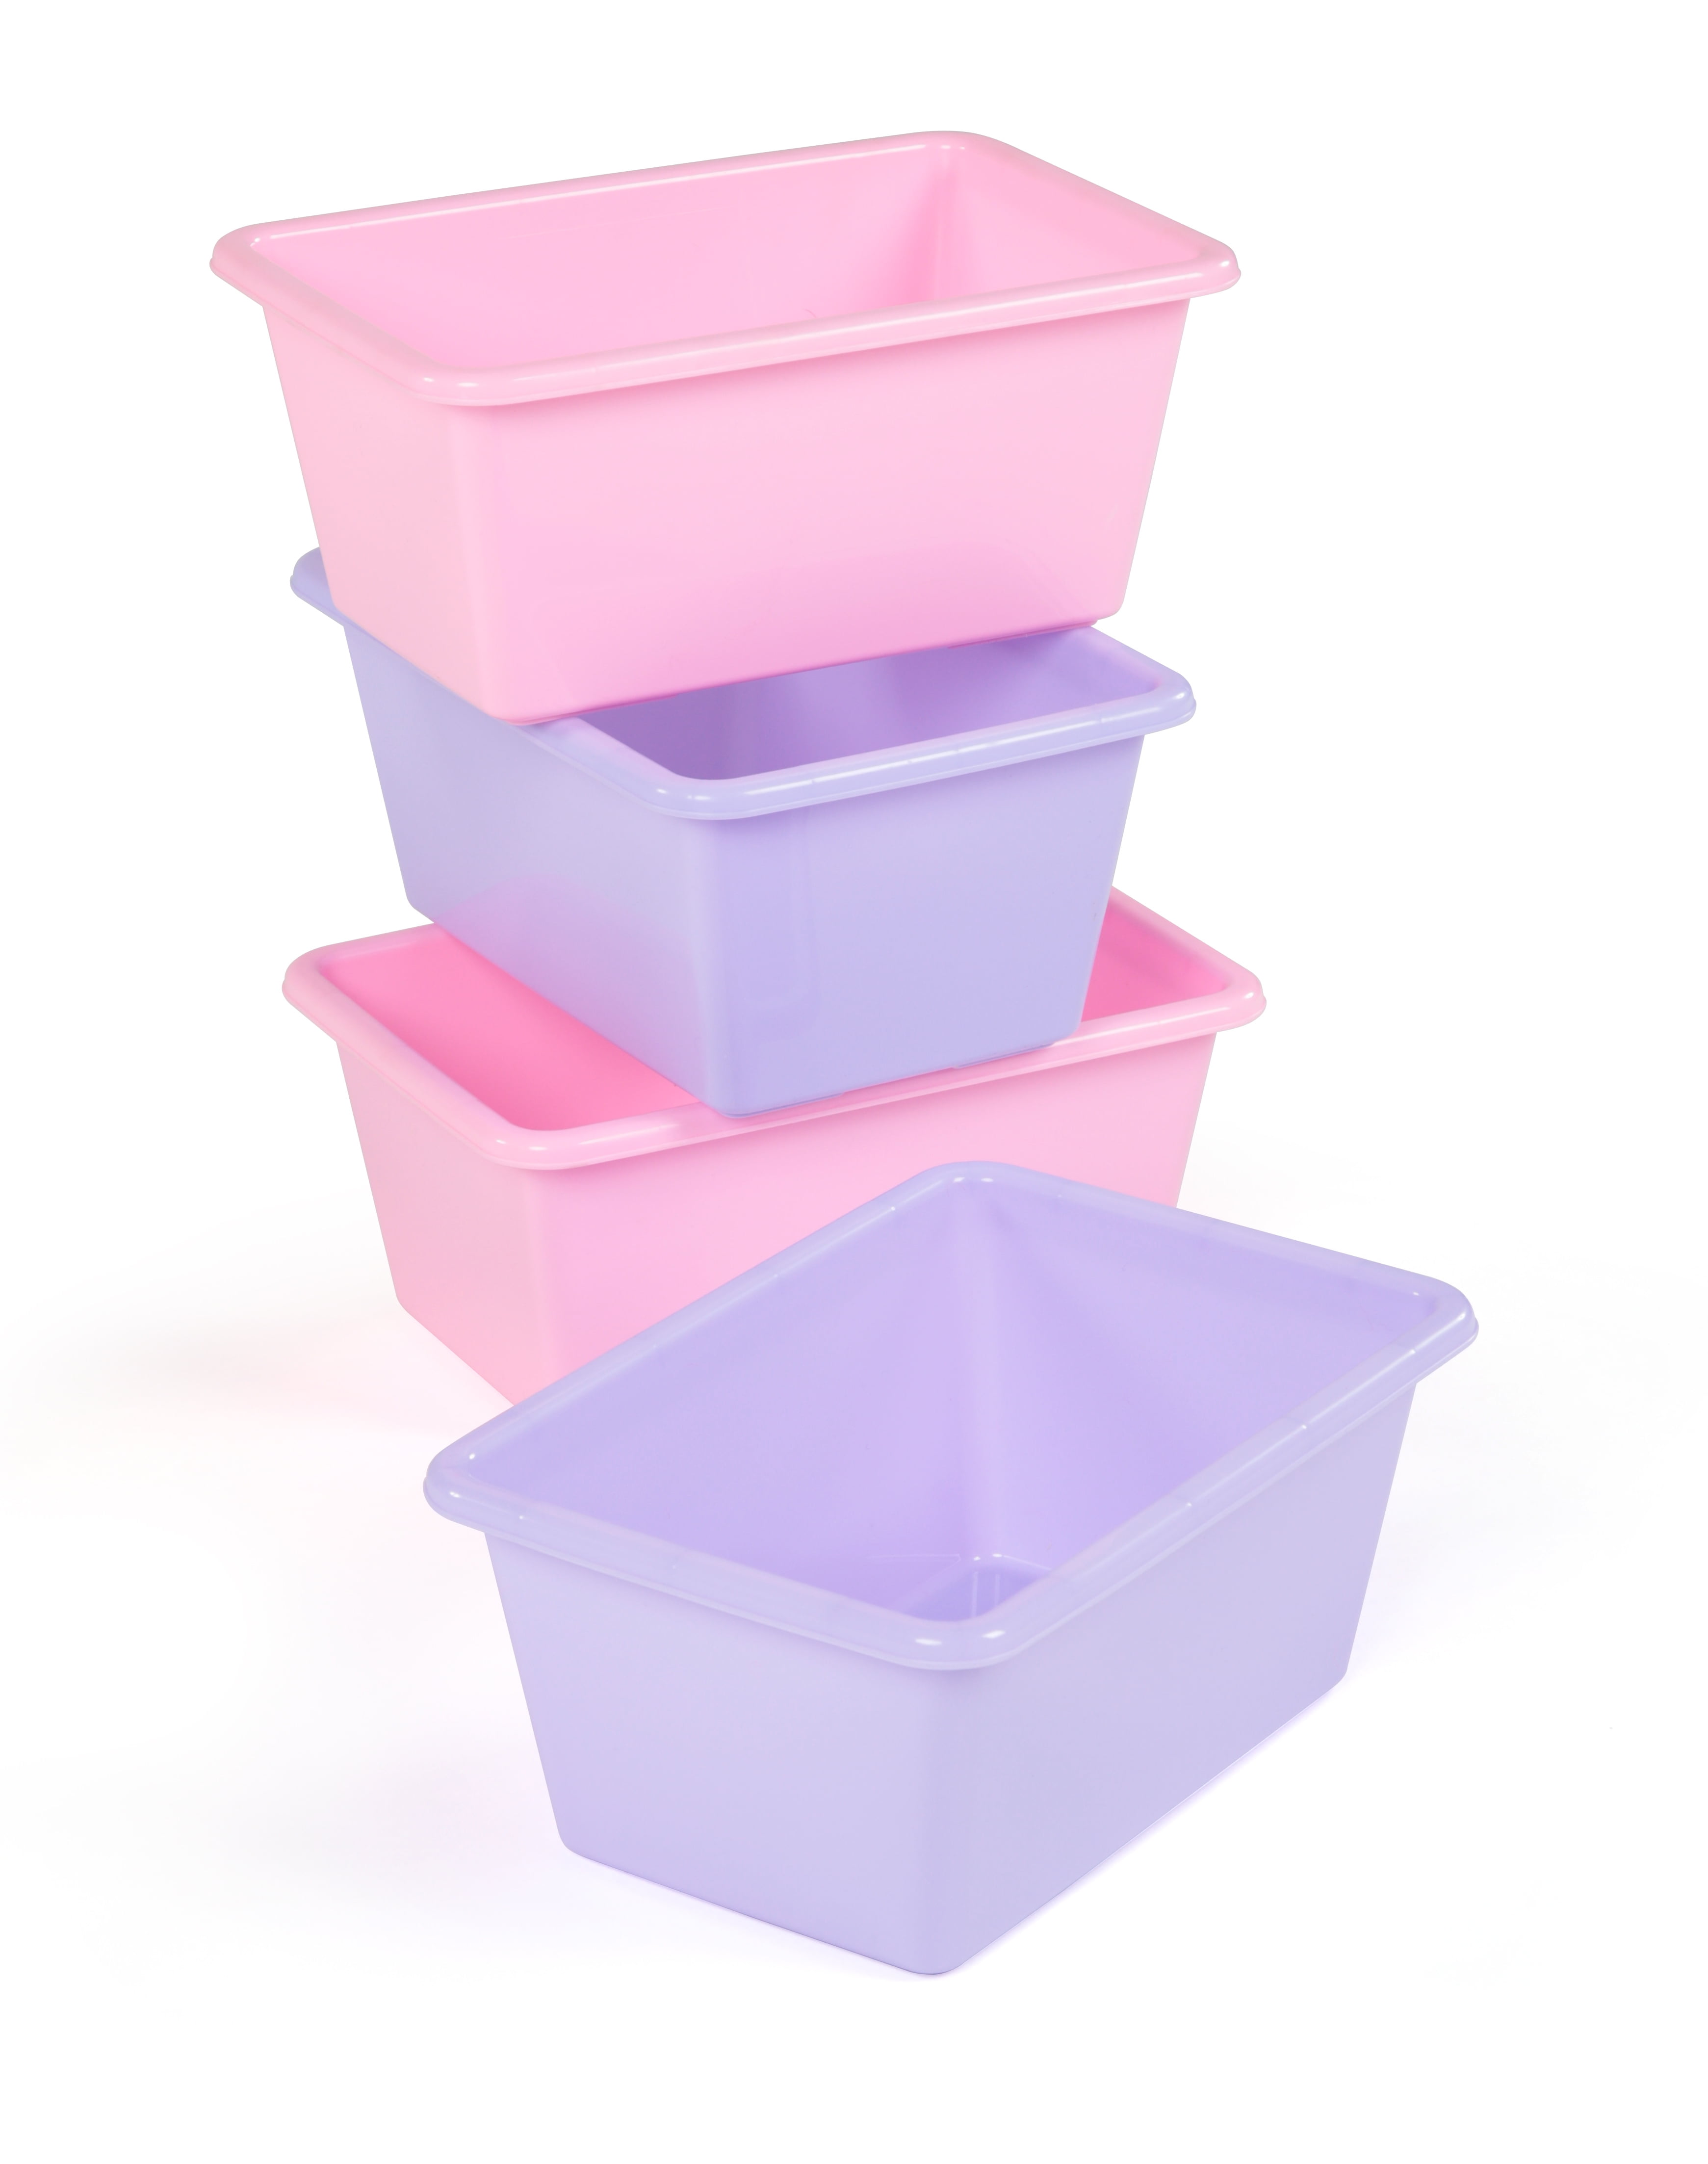 Rolling Toy Storage Bin Soft Pink, 23-3/8 x 15-1/8 x 12-3/8 H | The Container Store